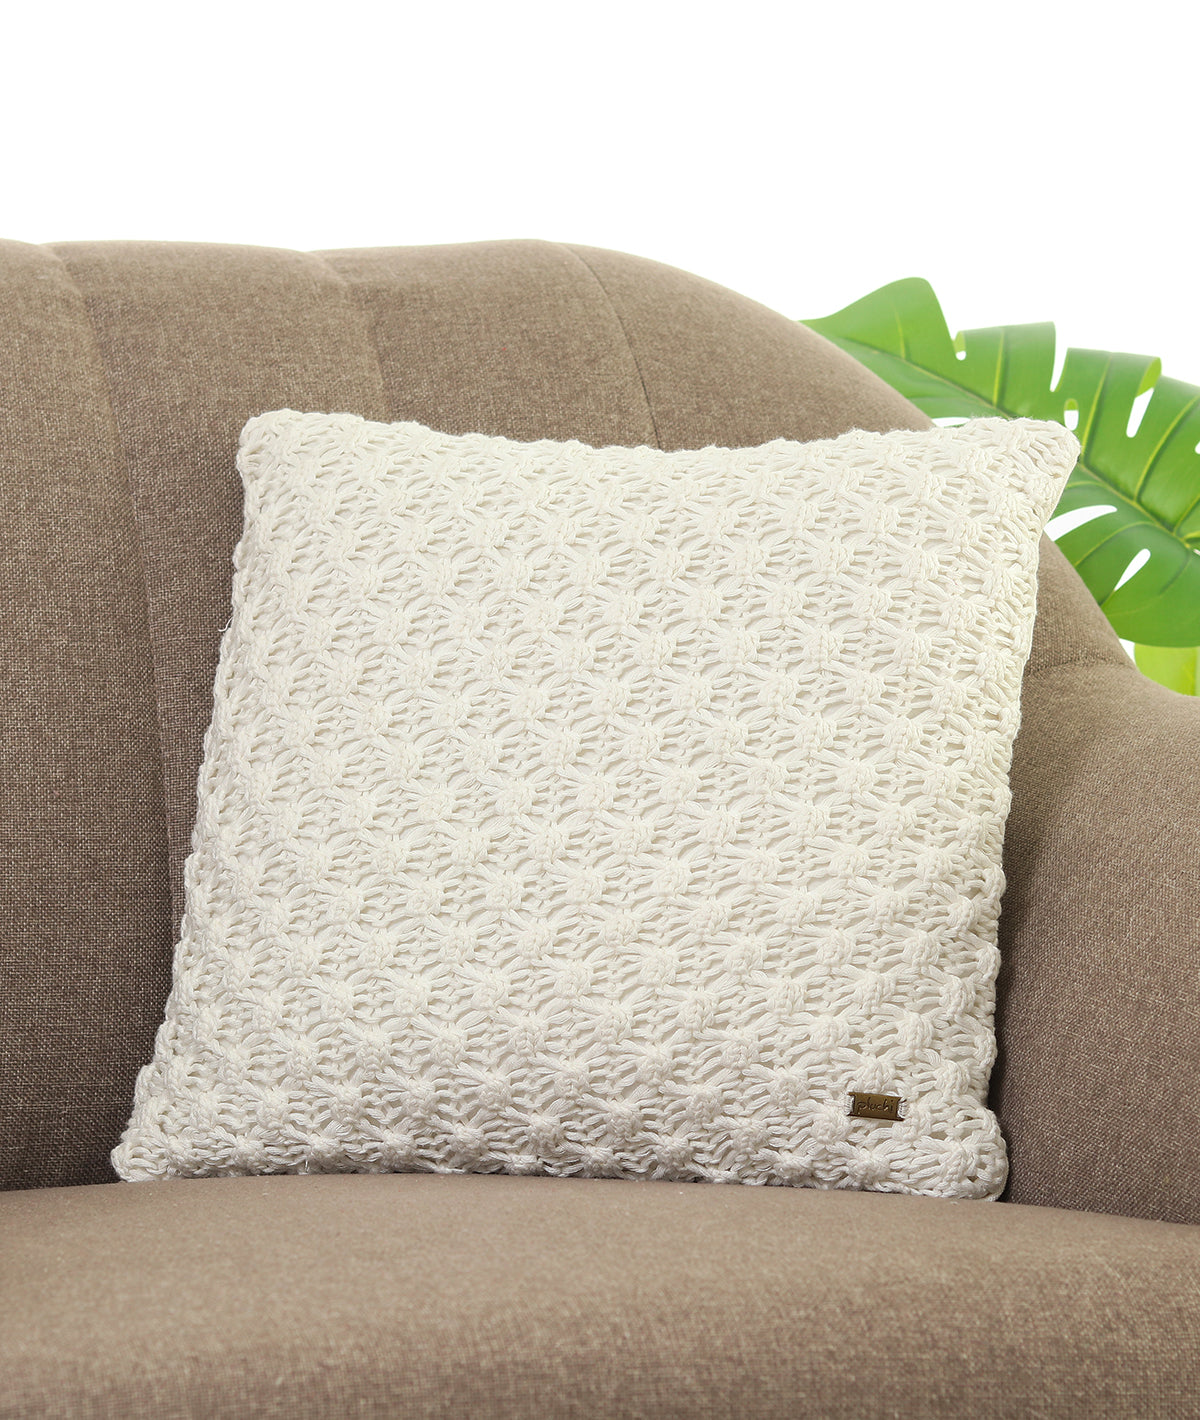 Popcorn Ivory Cotton Knitted Decorative 16 X 16 Inches Cushion Cover